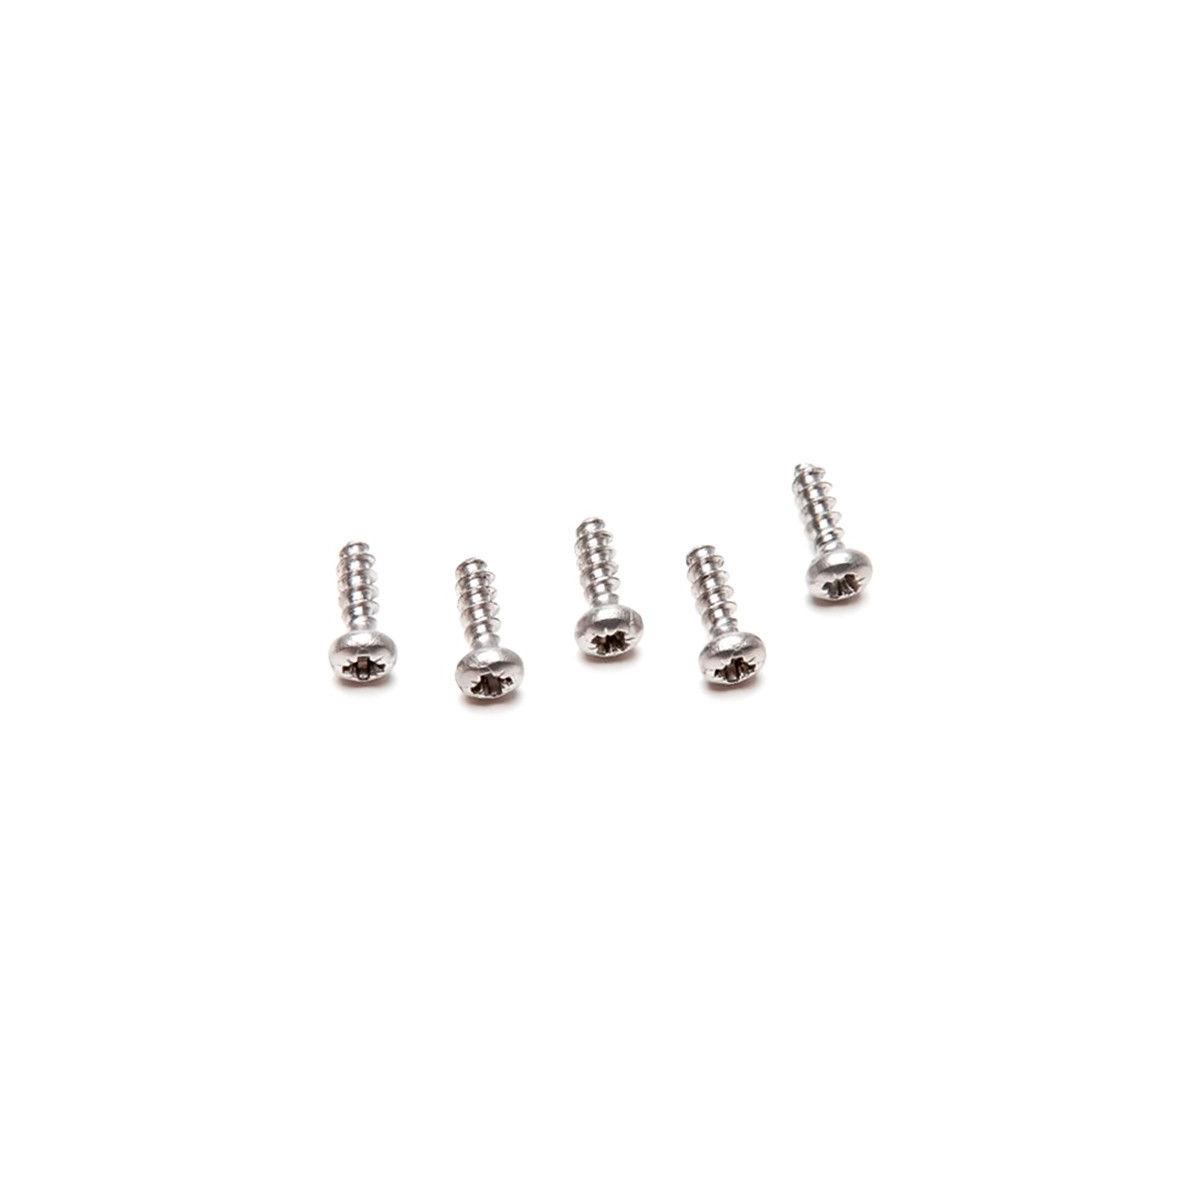 Tornillo 4*16 mm A4 (pack 5 uds.) R0608500